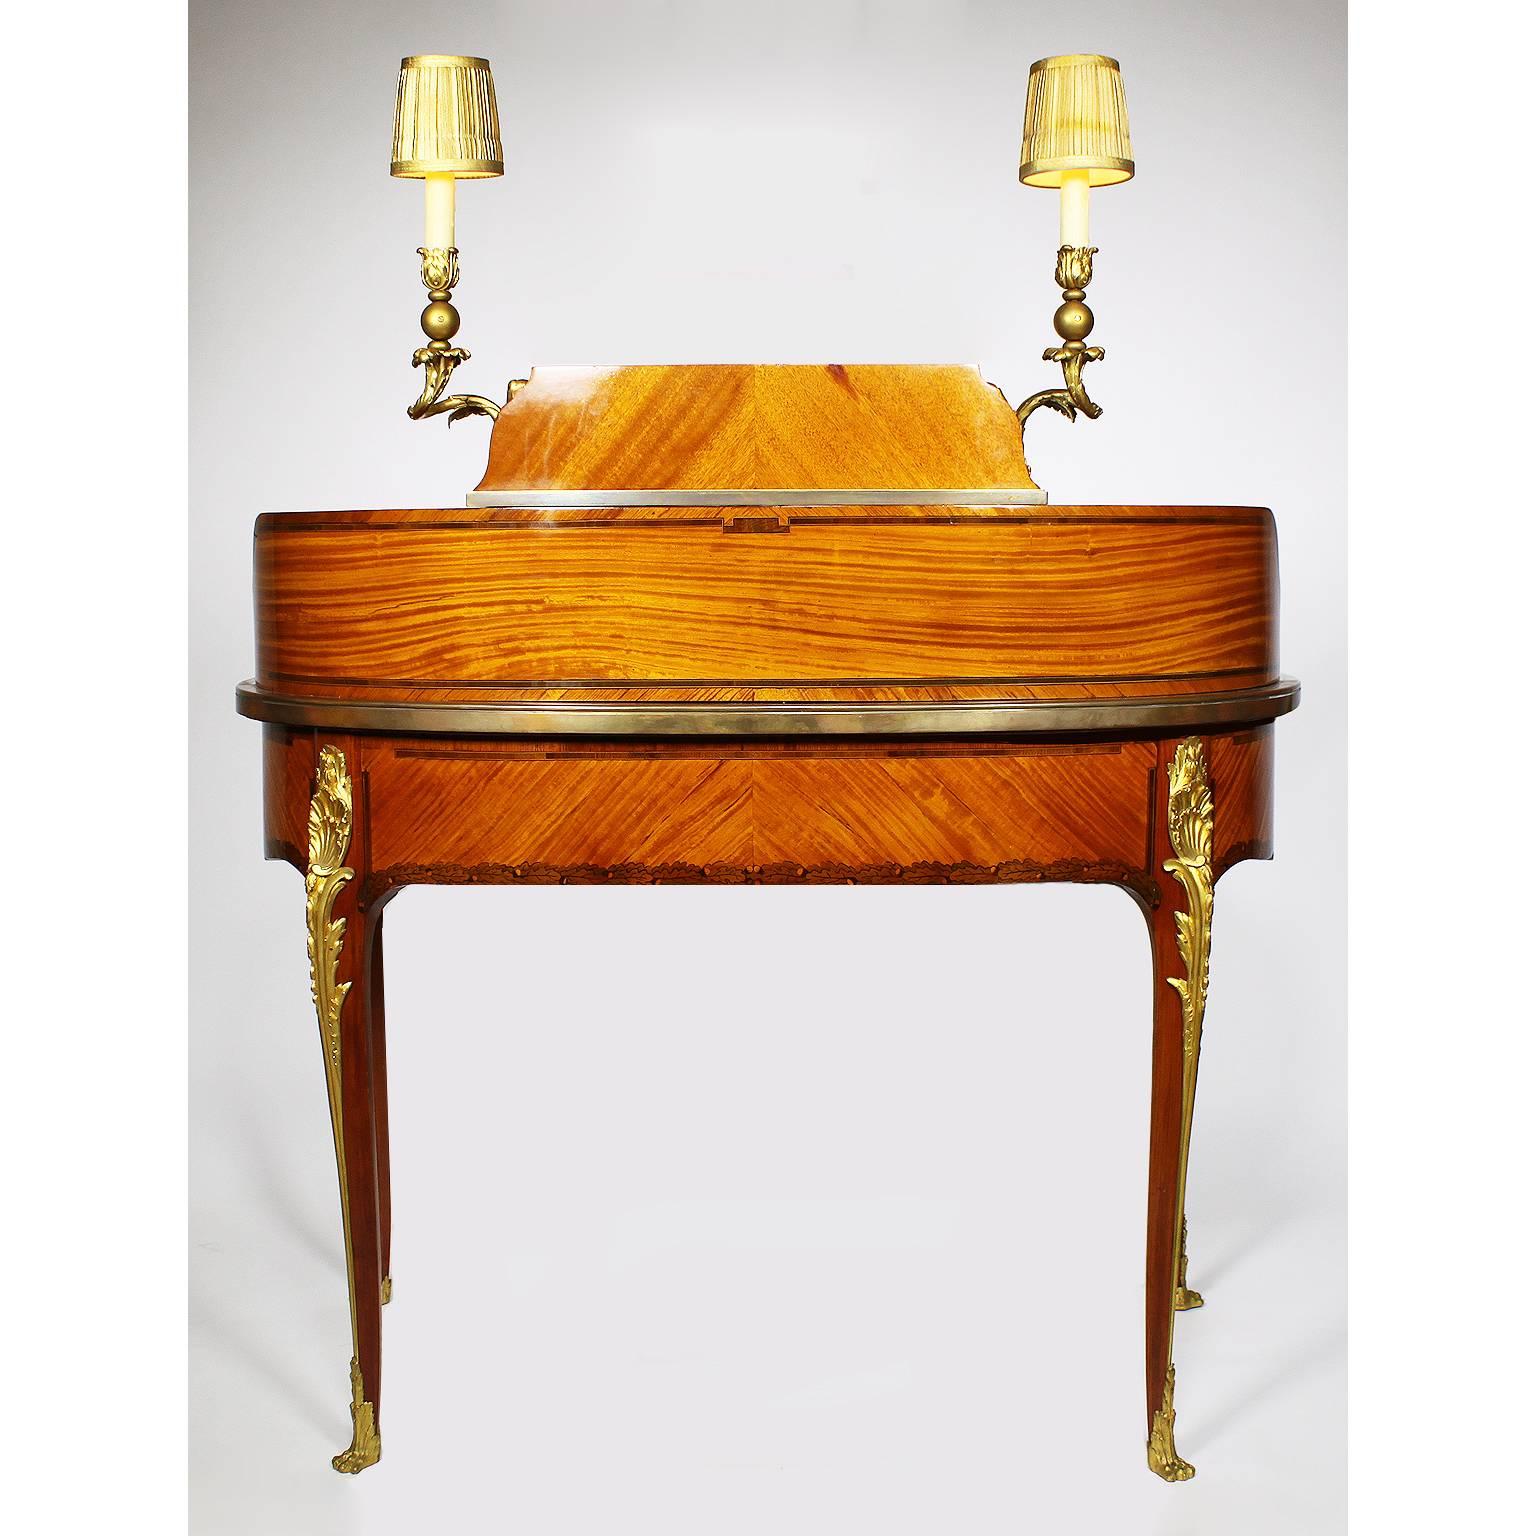 Fine French 19th Century Louis XV Style Tulipwood and Ormolu-Mounted Ladies Desk For Sale 7